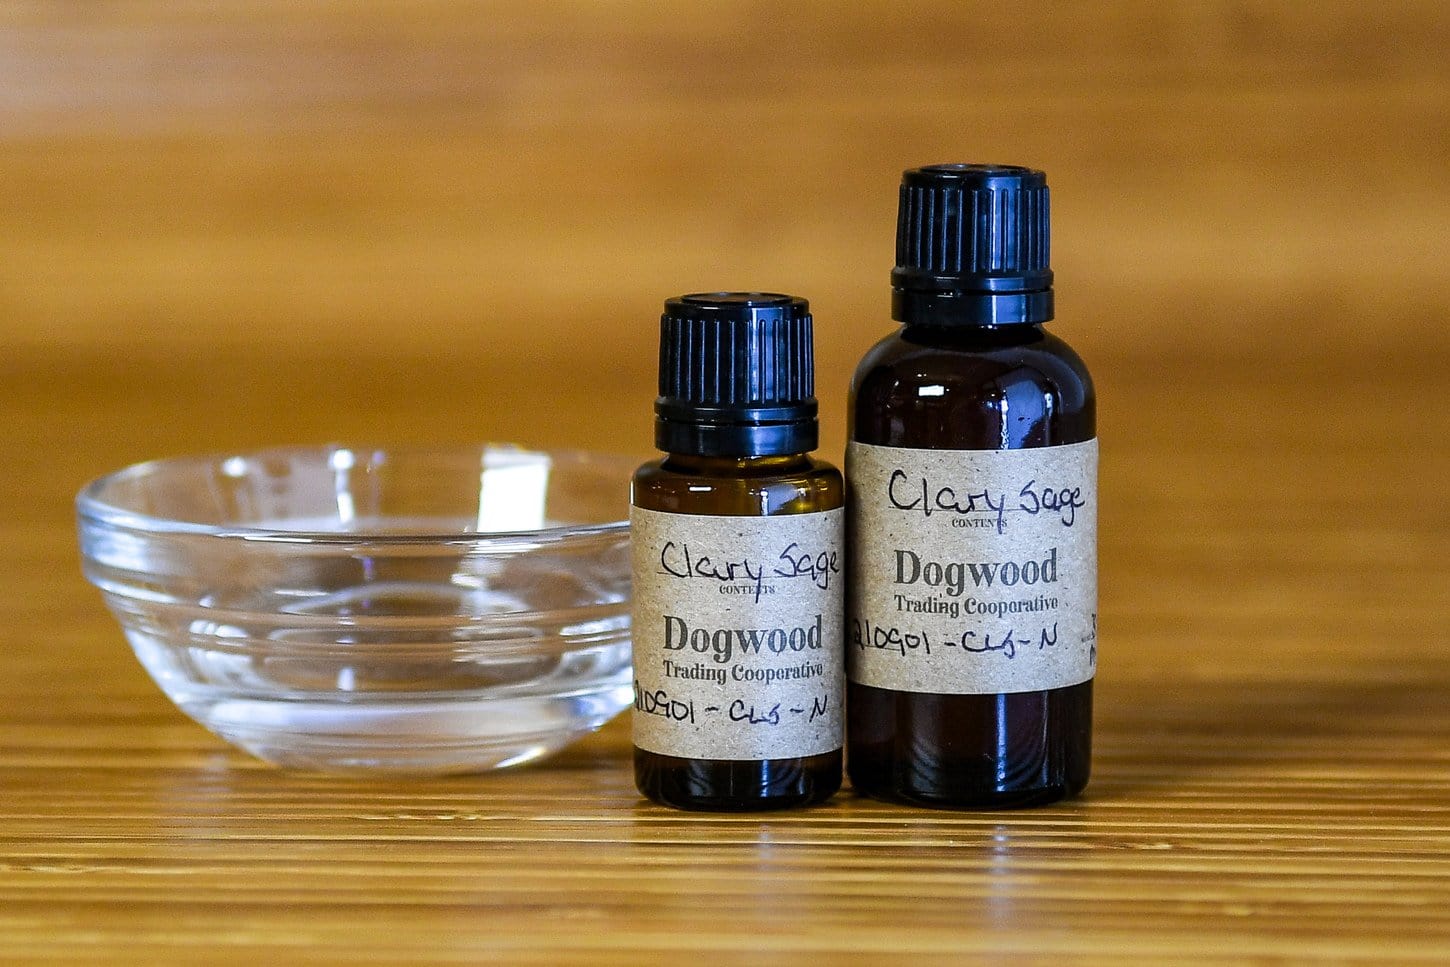 Clary Sage (France) - Retail - The Dogwood Trading Cooperative